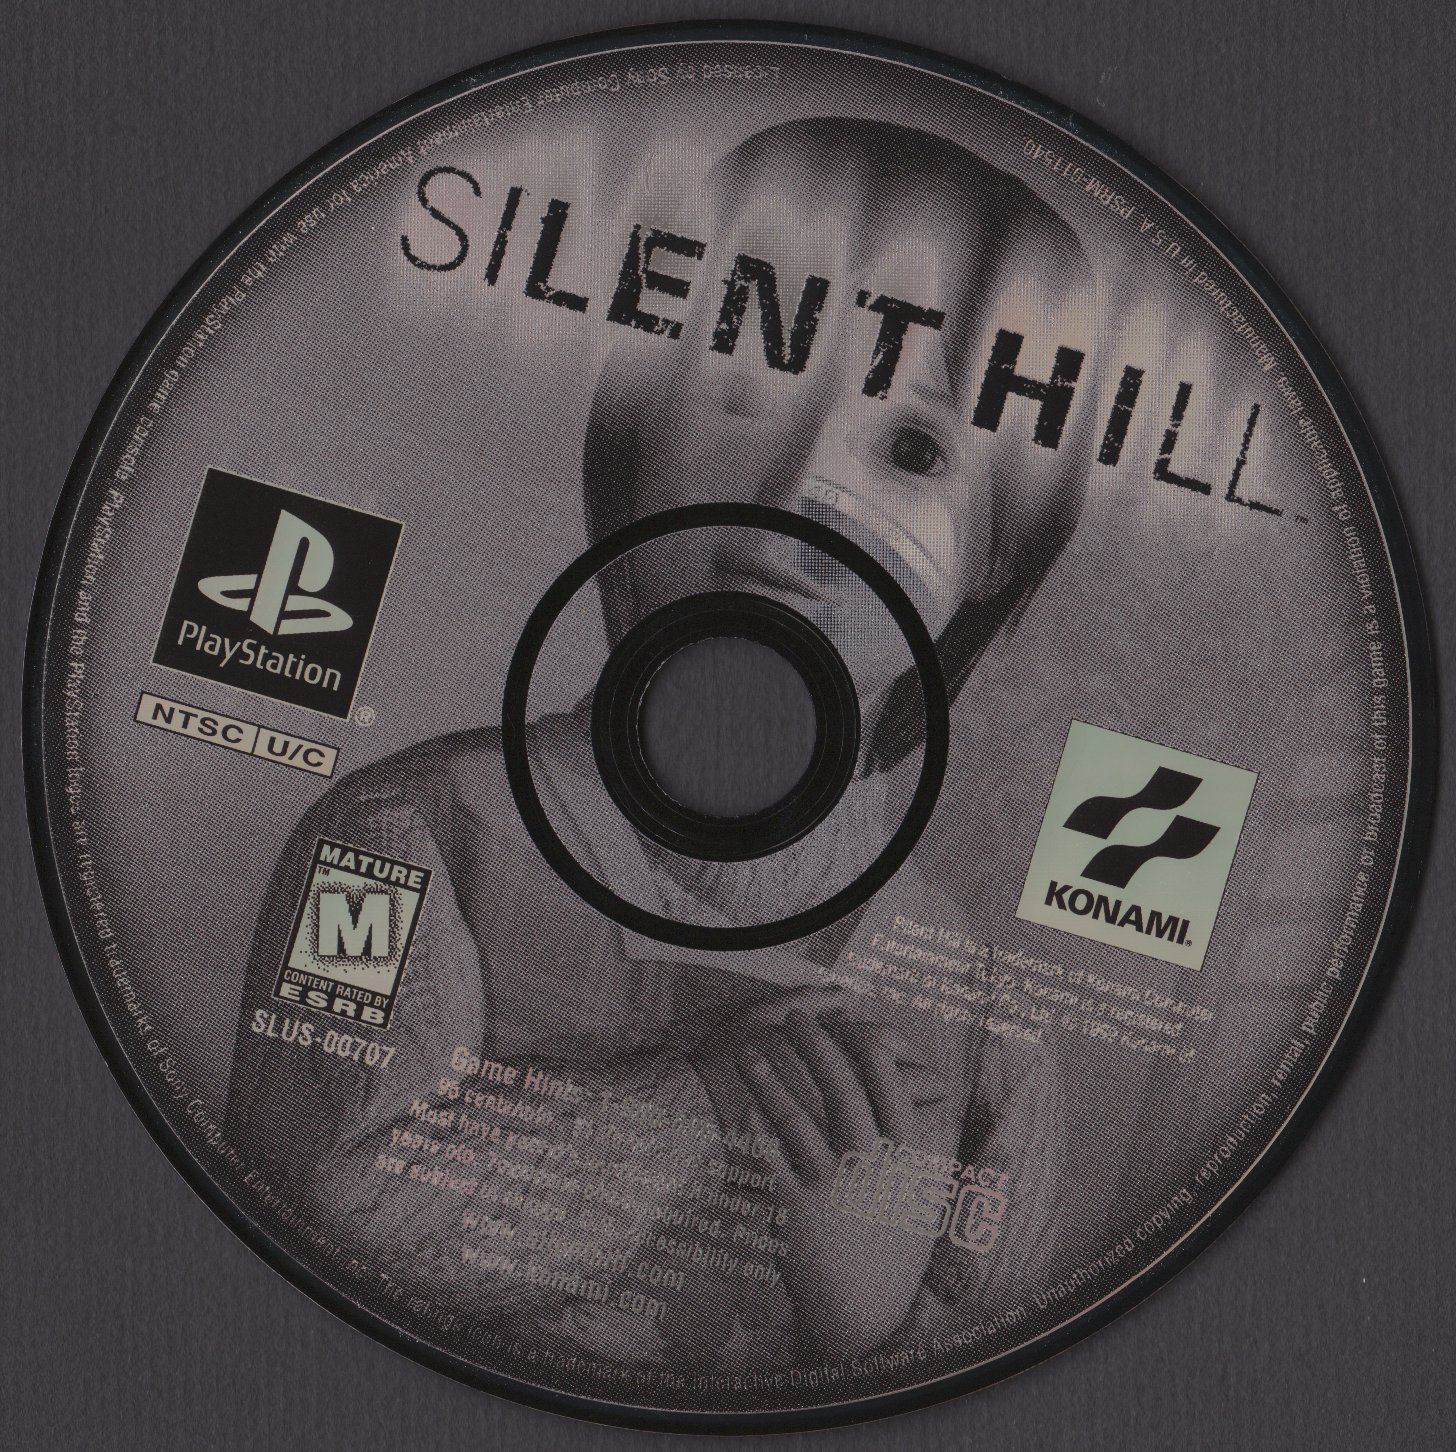 silent hill ps1